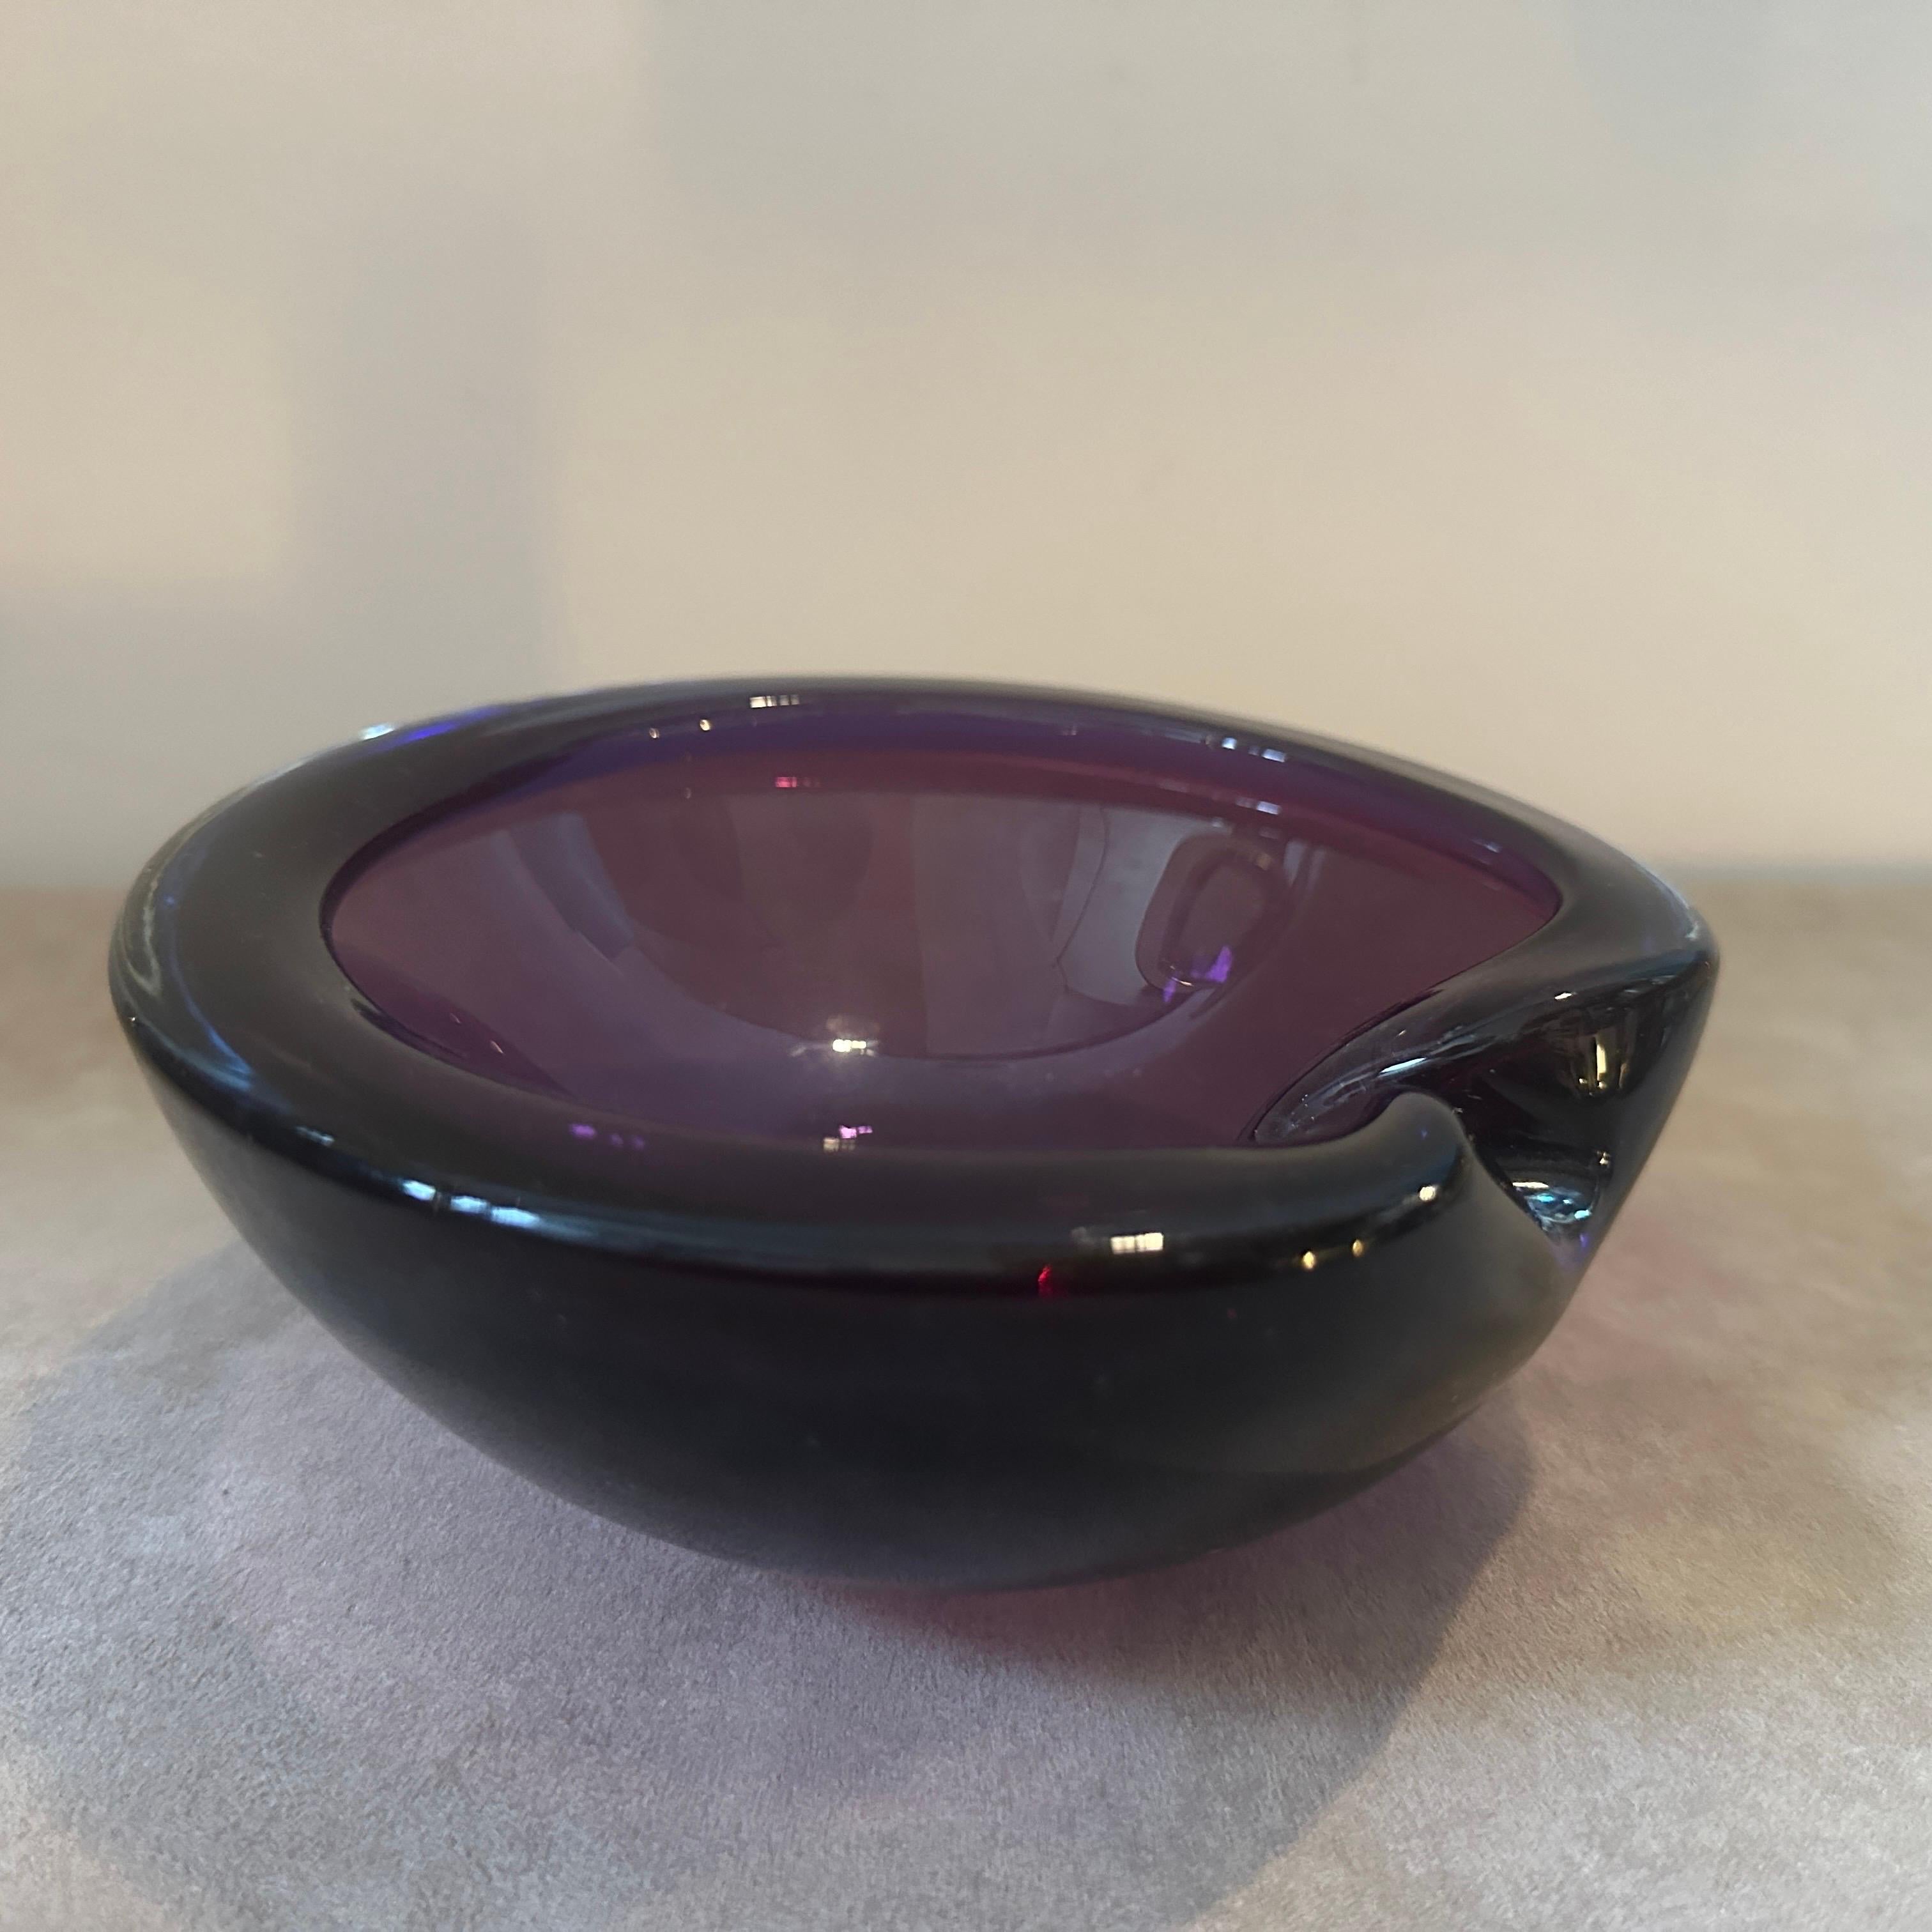 A perfect conditions blue and purple murano glass bowl hand-crafted in Venice in the Seventies by Seguso. The bowl  embodies the fusion of art and functionality, serving as both a practical object and a visually captivating work of art. Modernist